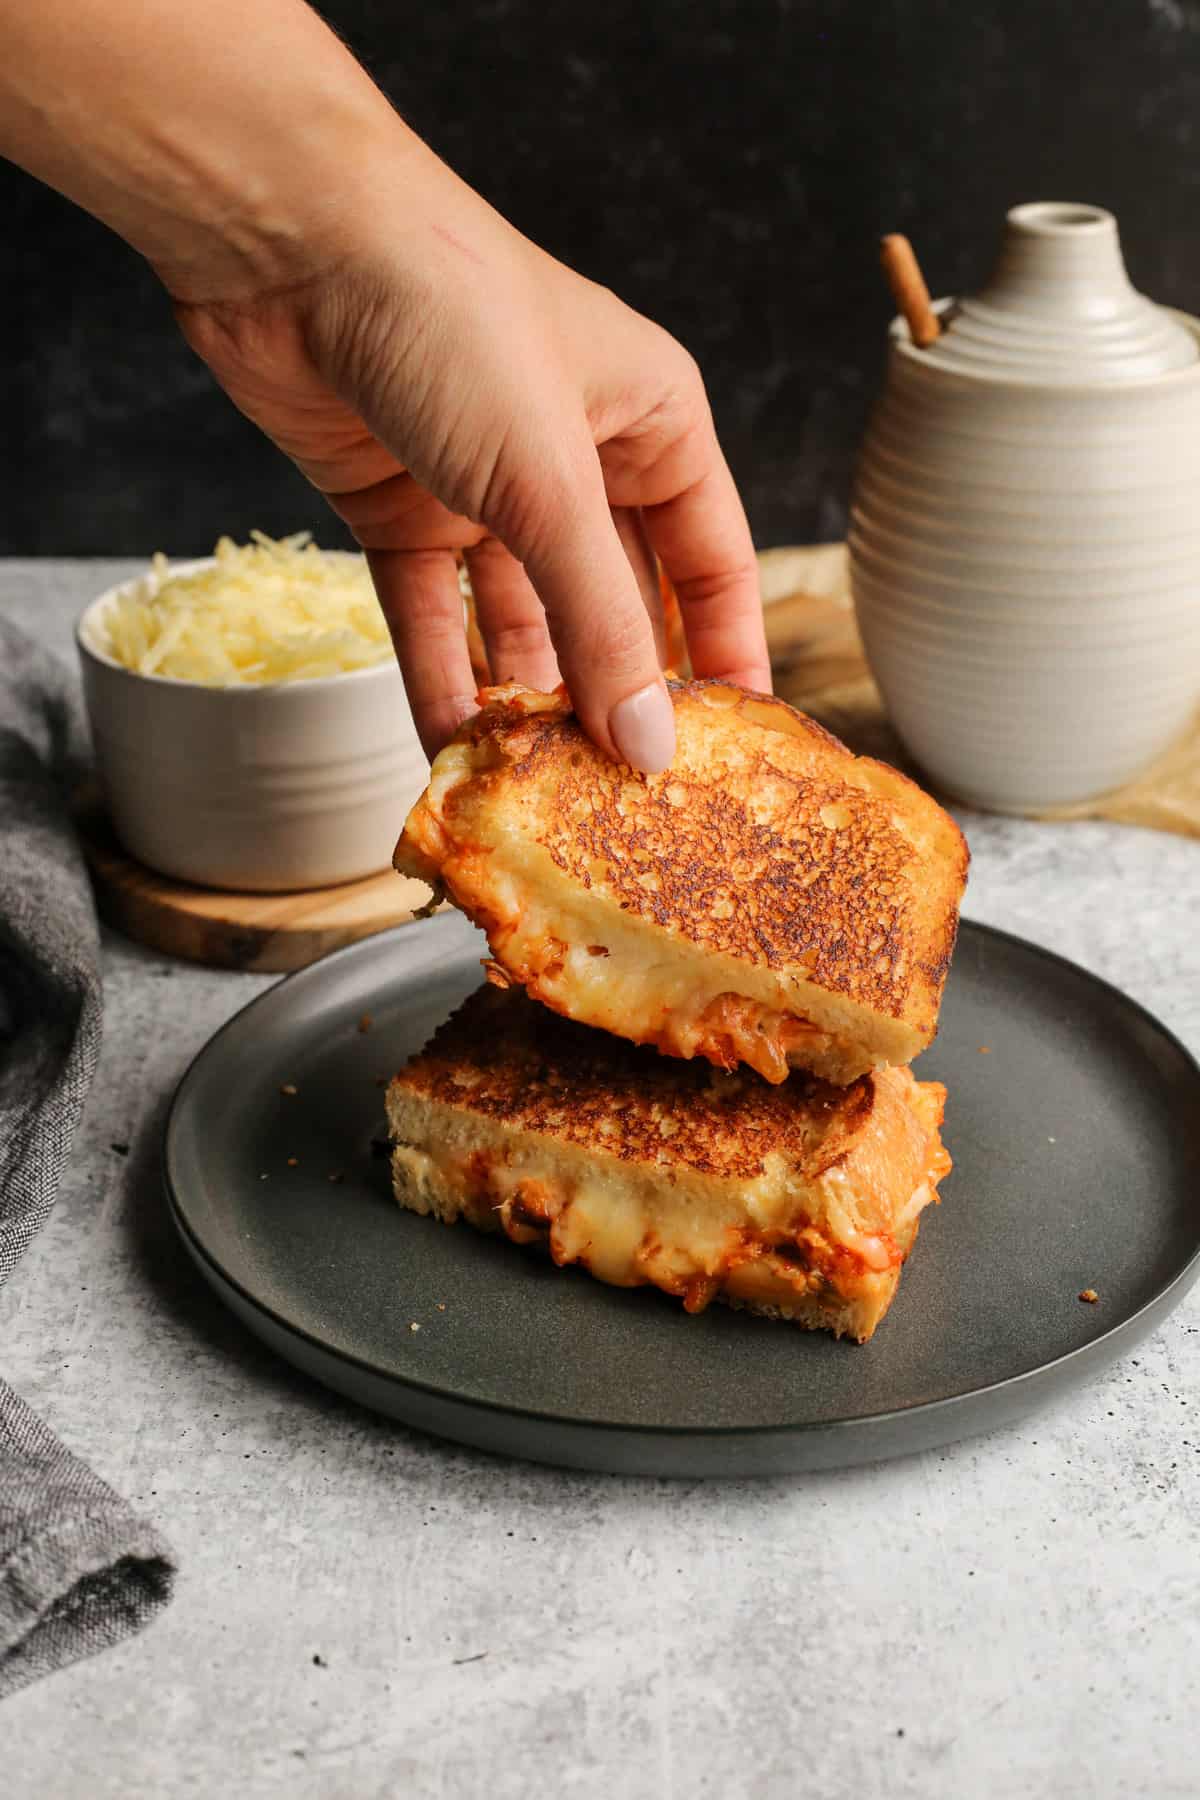 A woman's hand reaches into the frame to pick up half of a sandwich. You can see melted cheese and kimchi inside the toasted bread